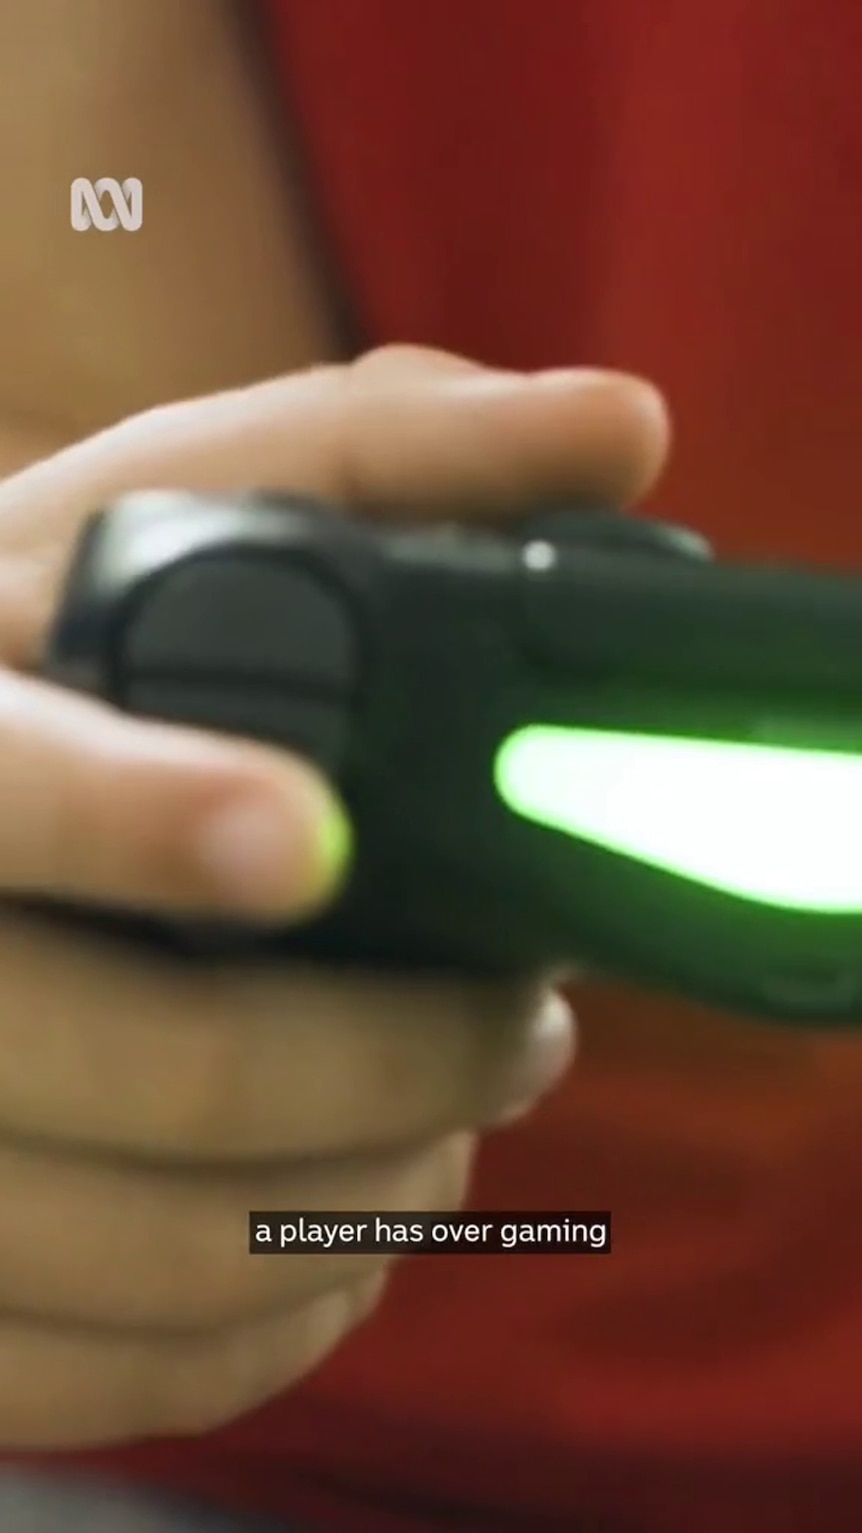 A gaming controller sits in the hand of a young person with a light skin tone